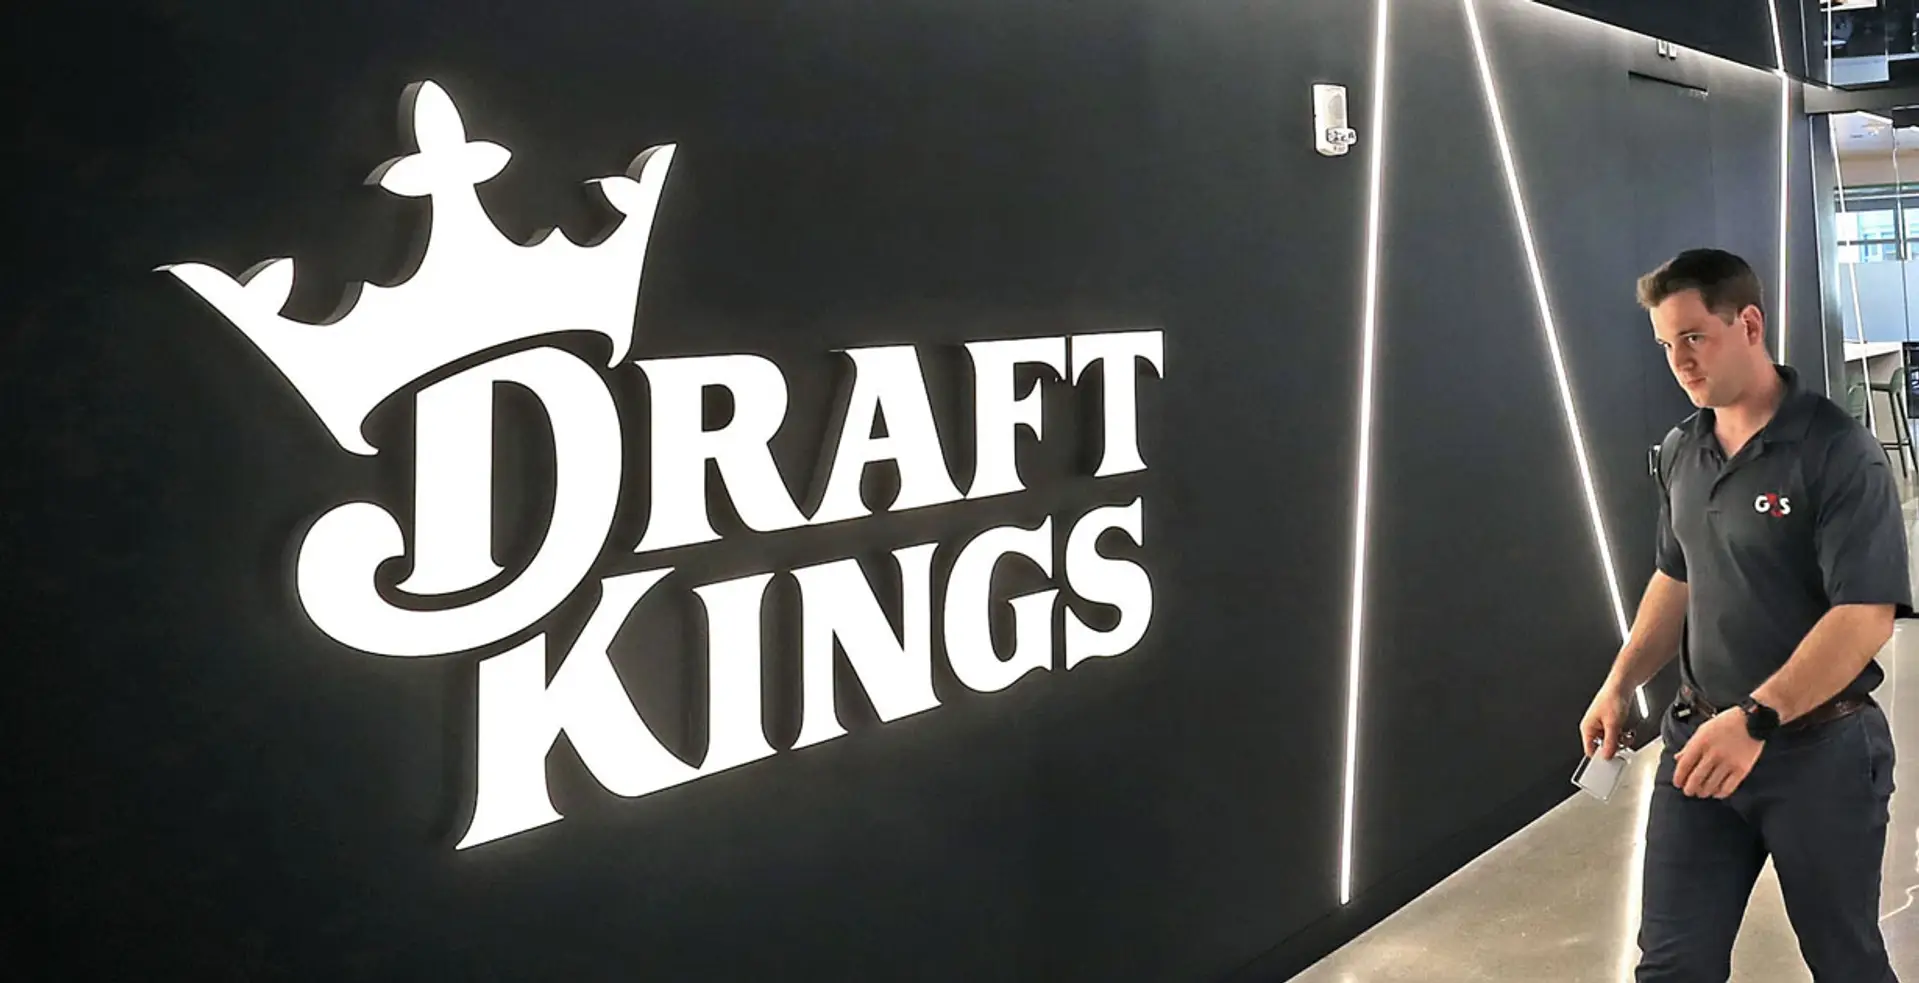 DraftKings show 53% YOY revenue growth in Q1, correct annual revenue and EBITDA plans